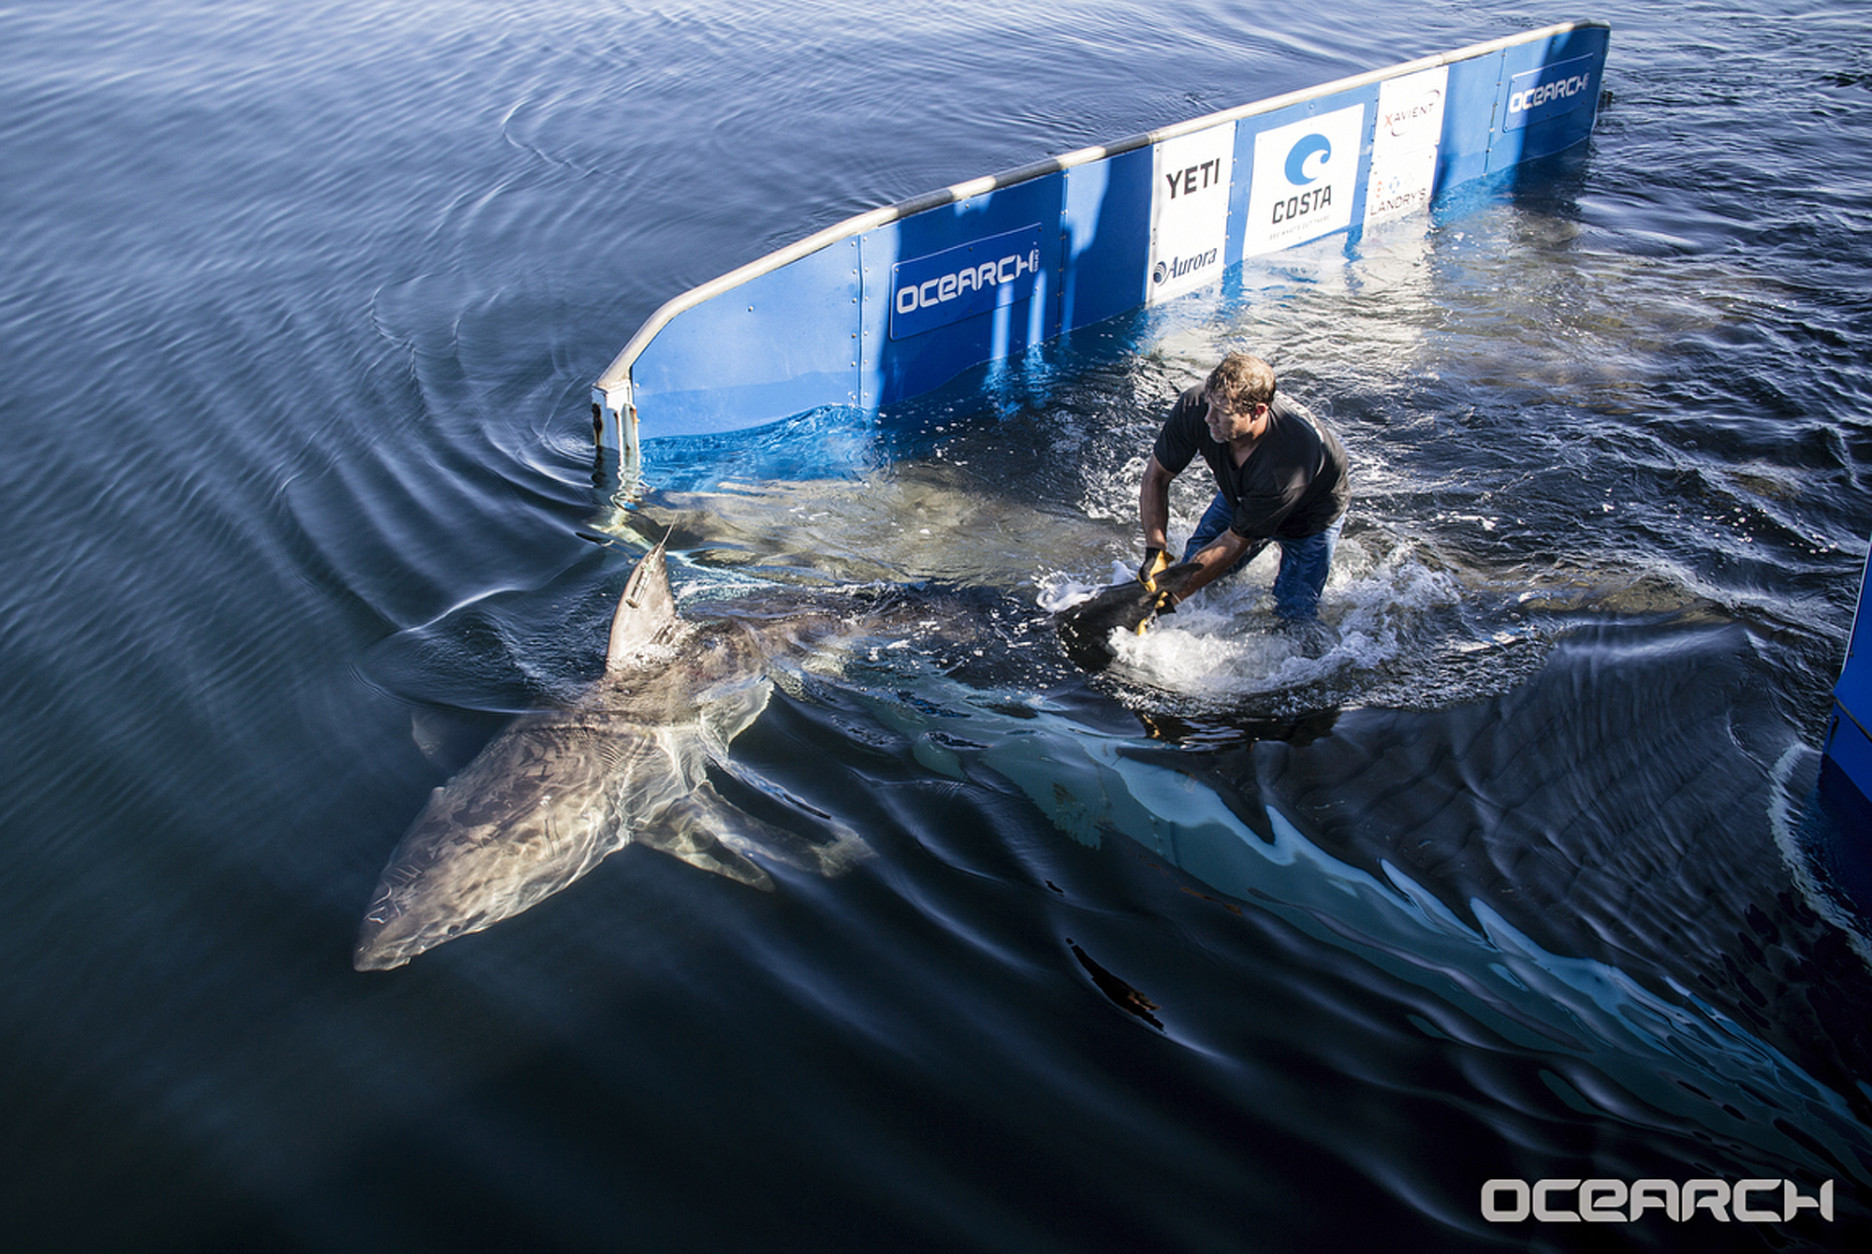 In this Sept. 22, 2016 photo provided by OCEARCH, a female great white shark named Miss Costa swims off a shark lift after researchers tagged and sampled her off Nantucket, Mass. The  expedition said it has confirmed that waters between southern Massachusetts and New York's Long Island point are a “nursery” where the powerful predators spend much of the first year of their lives feeding and growing. (Robert Snow/OCEARCH via AP)